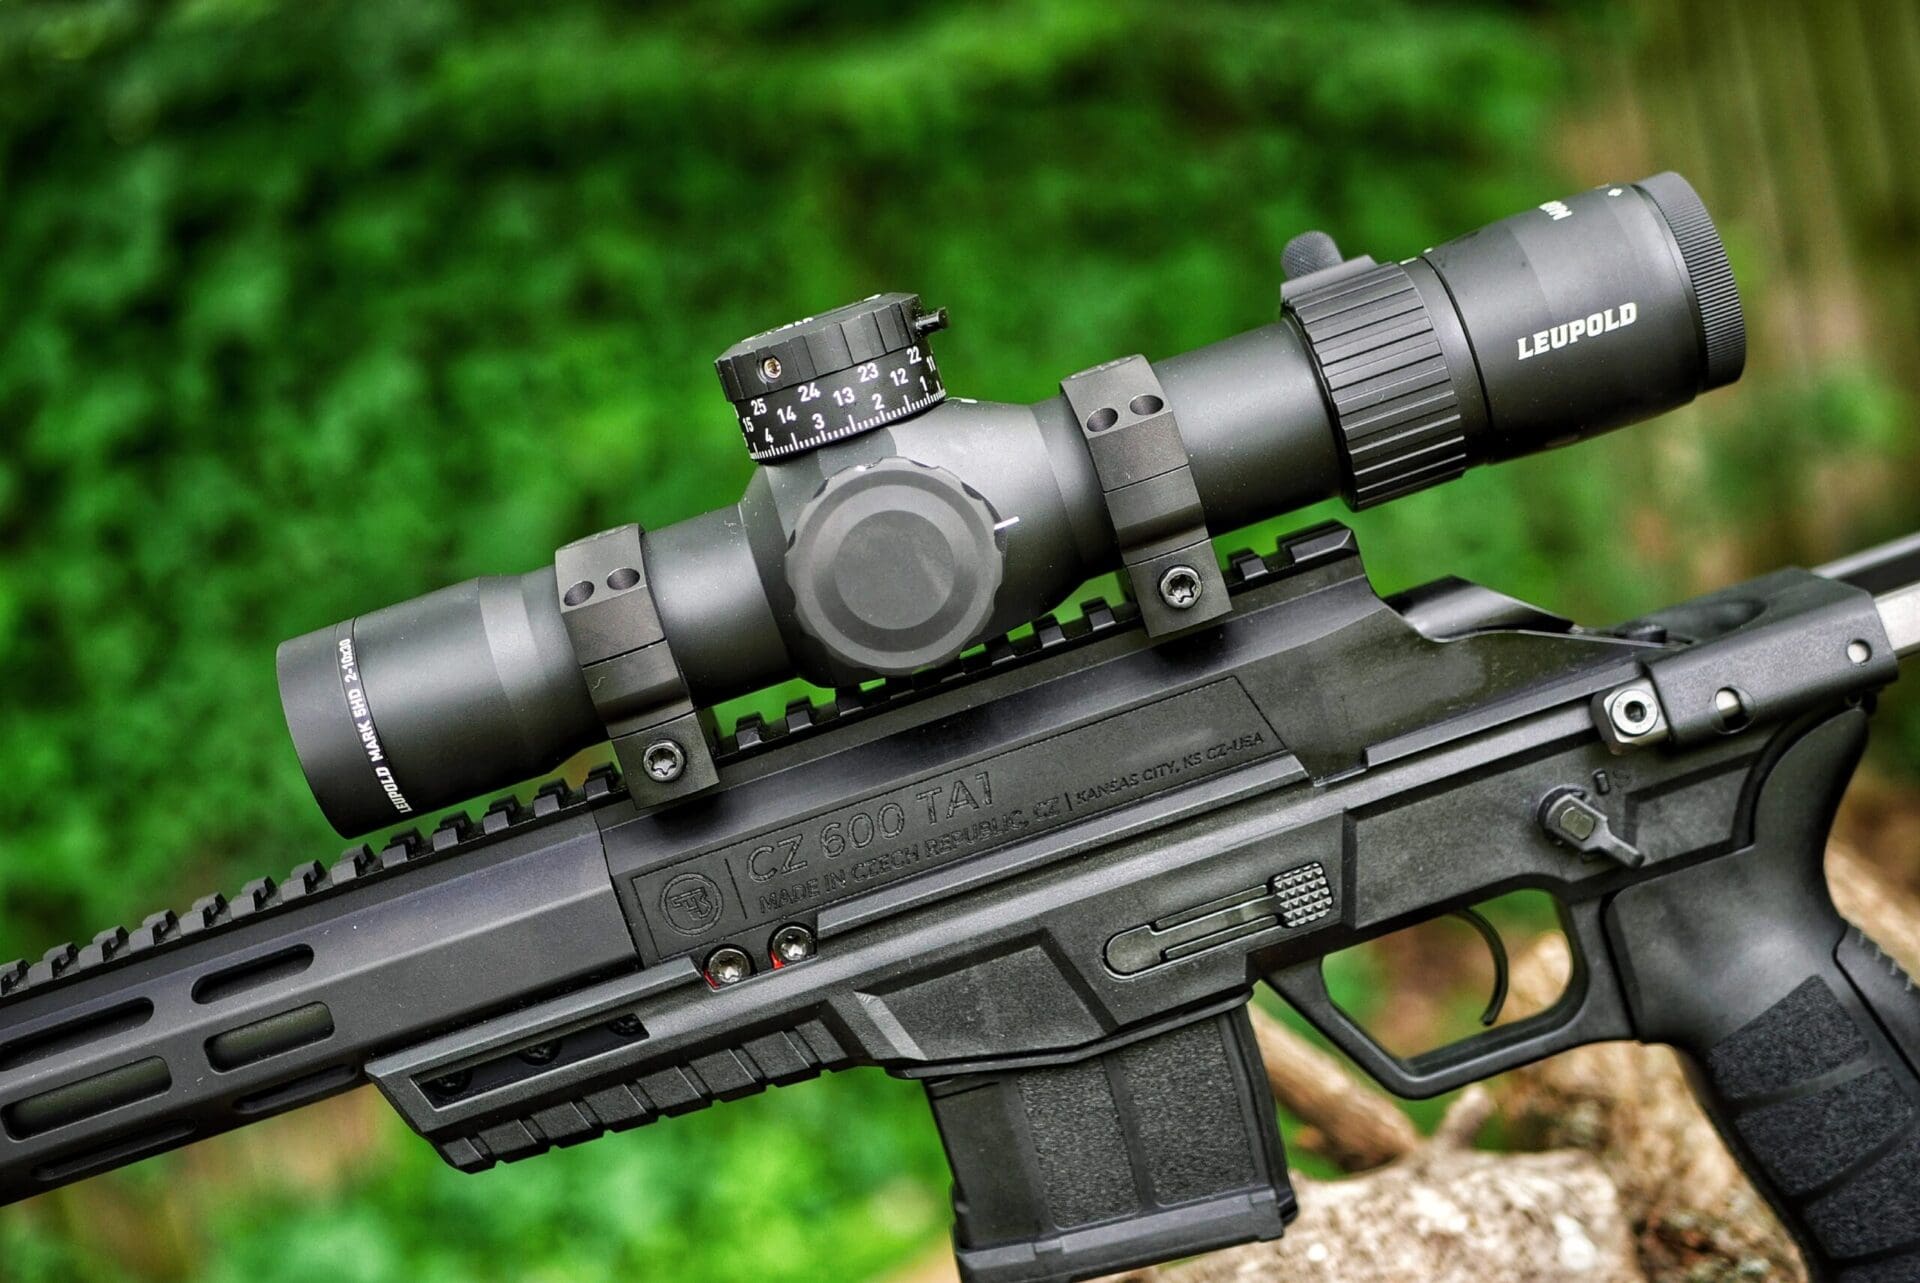 The Tactical Combat Optic Review Leupold Mark 5HD 2 10x30 Rifle Scope